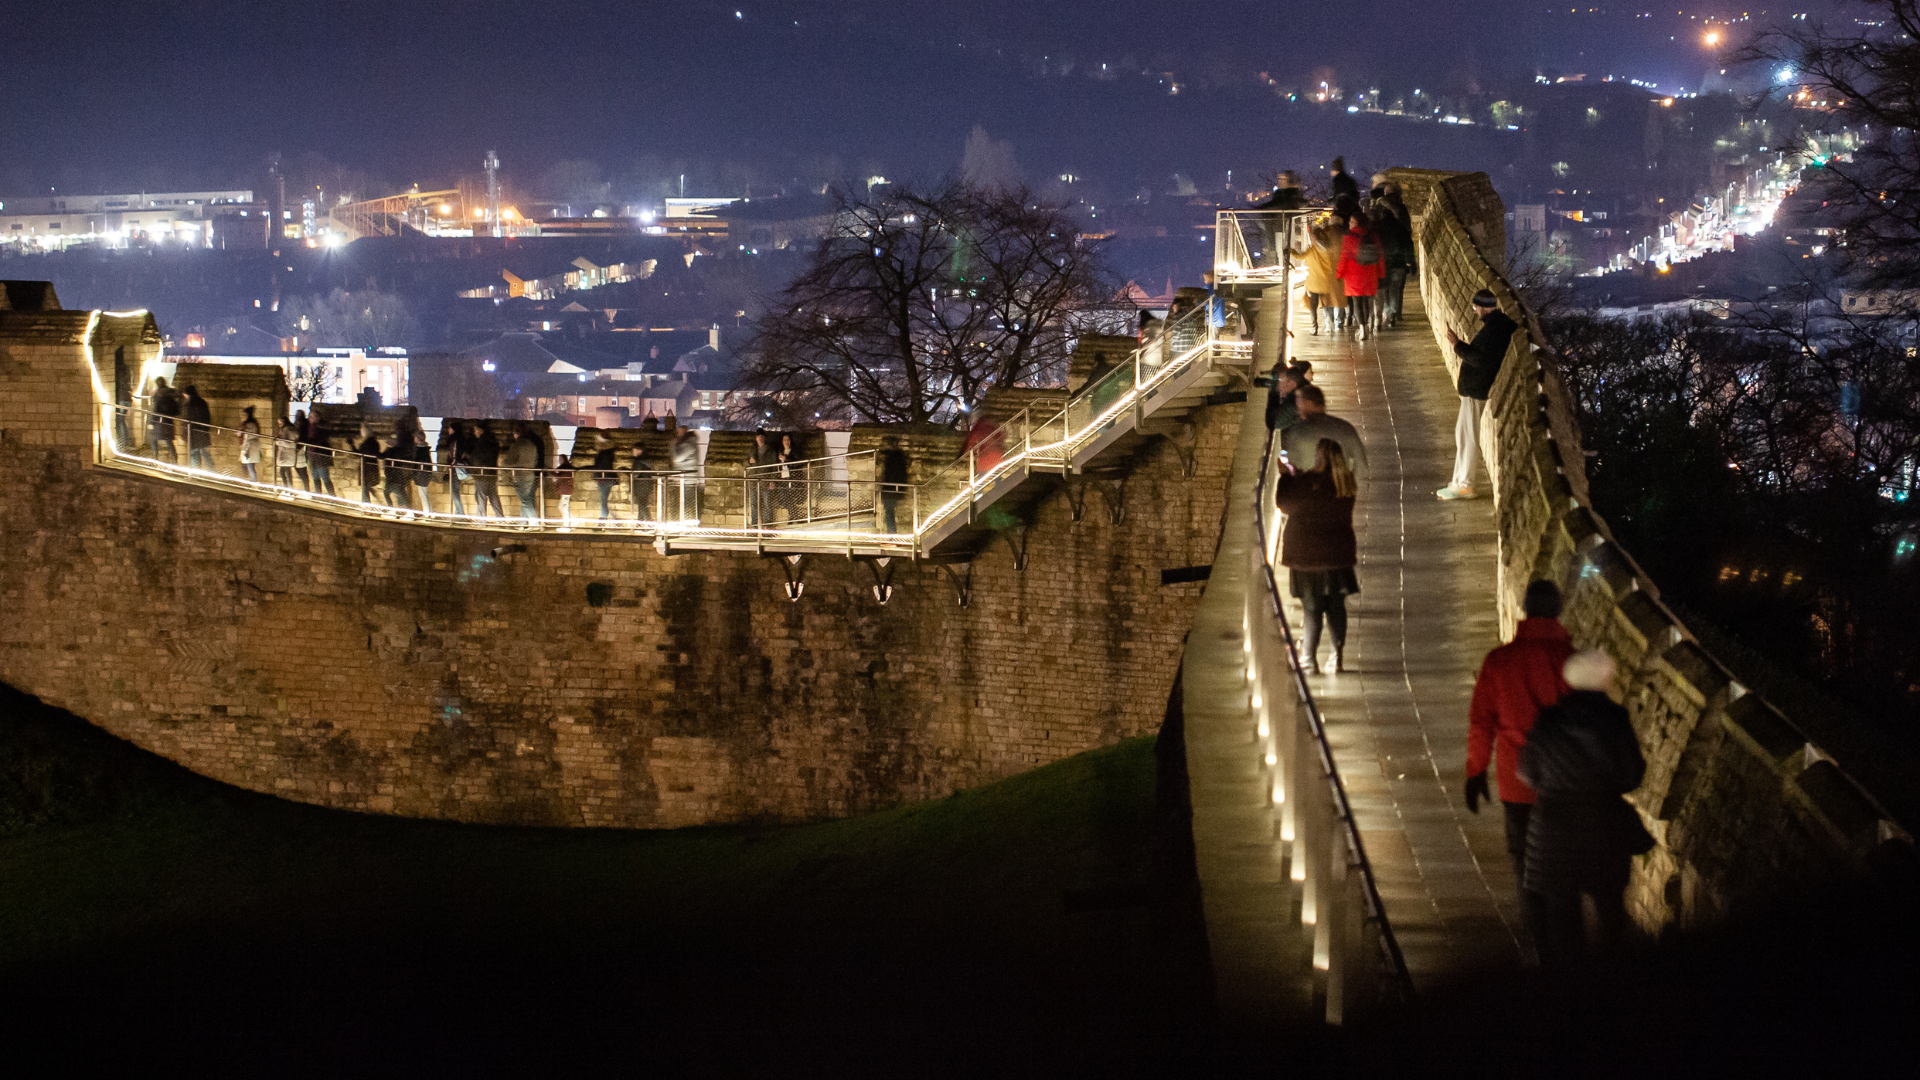 A medieval wall walk illuminated by lights at dark, with people walking along the wall